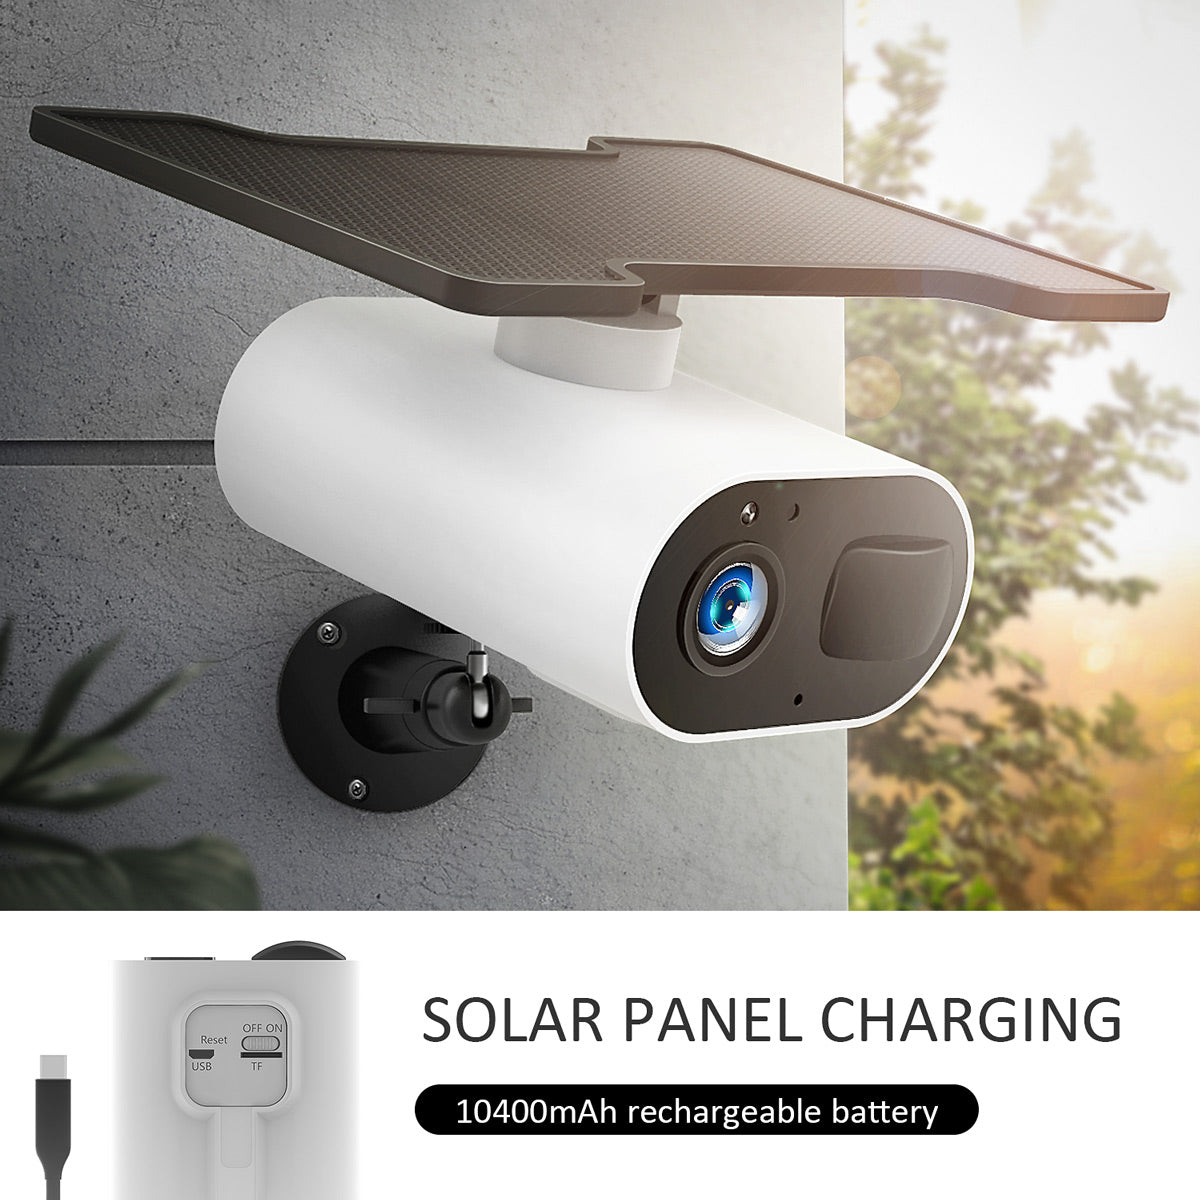 Toguard AP25 1080P Solar Wireless WiFi IP Security Camera（Only available in the US）